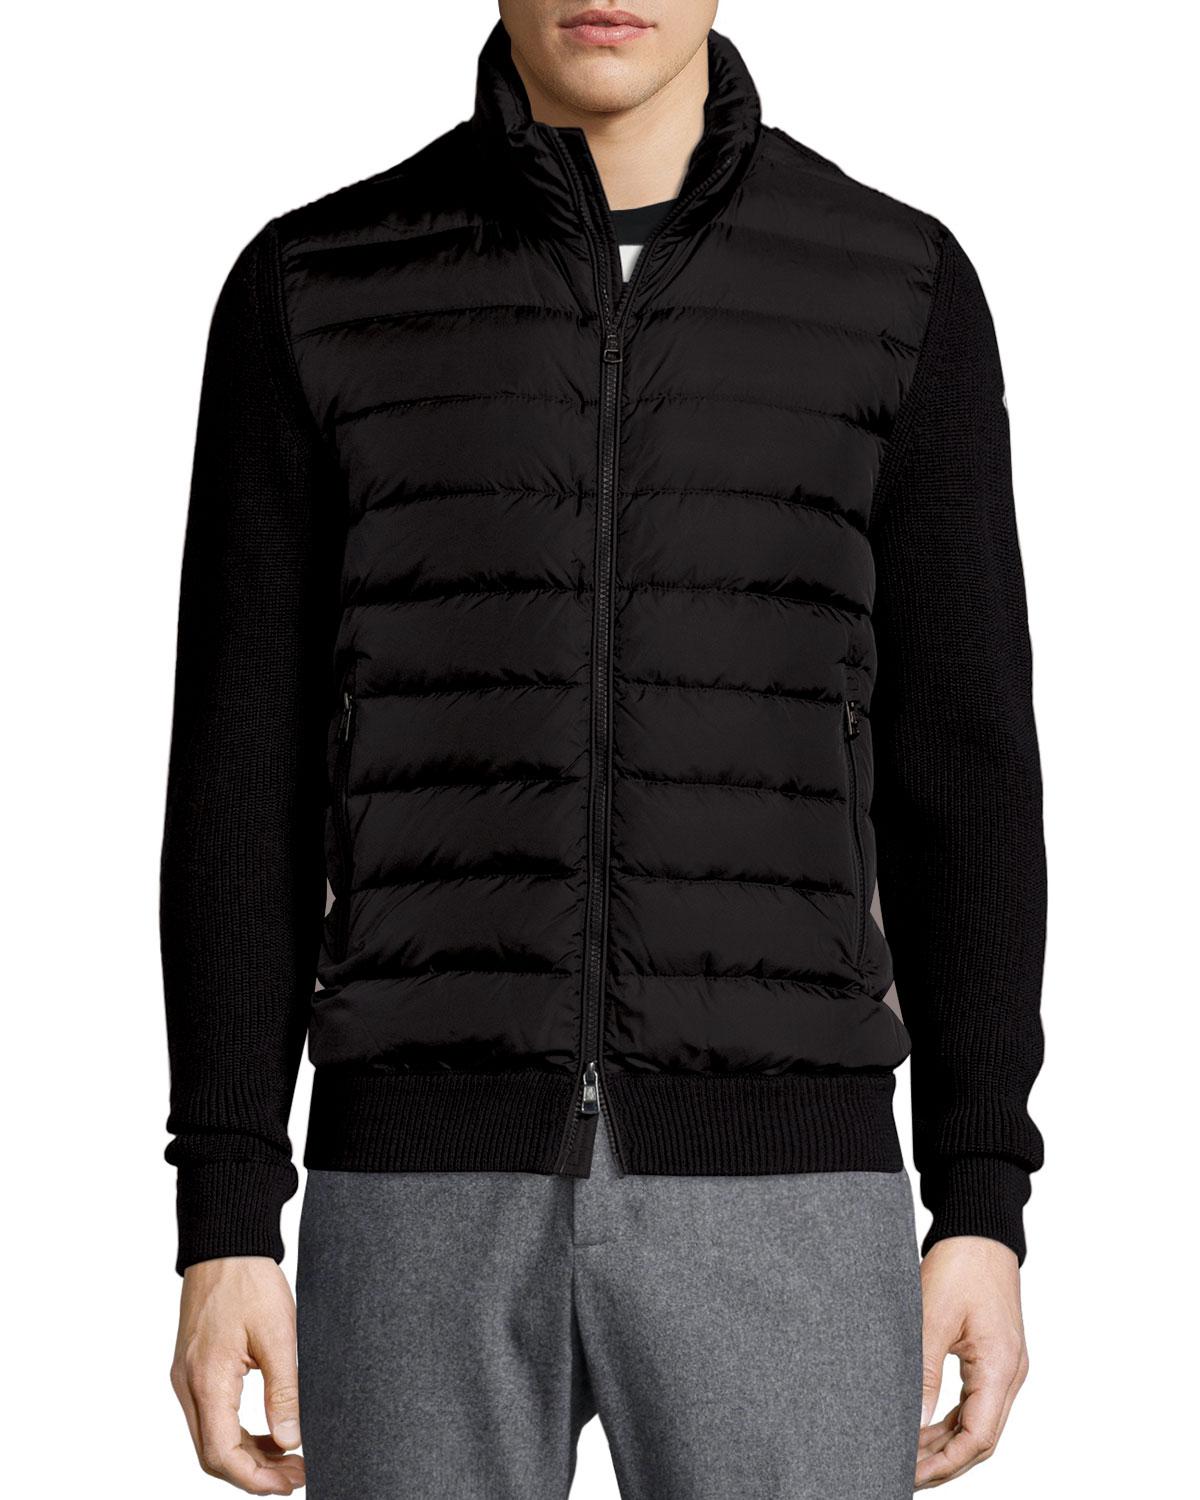 Moncler Wool Zip-up Sweater With Puffer-front in Black for Men - Lyst